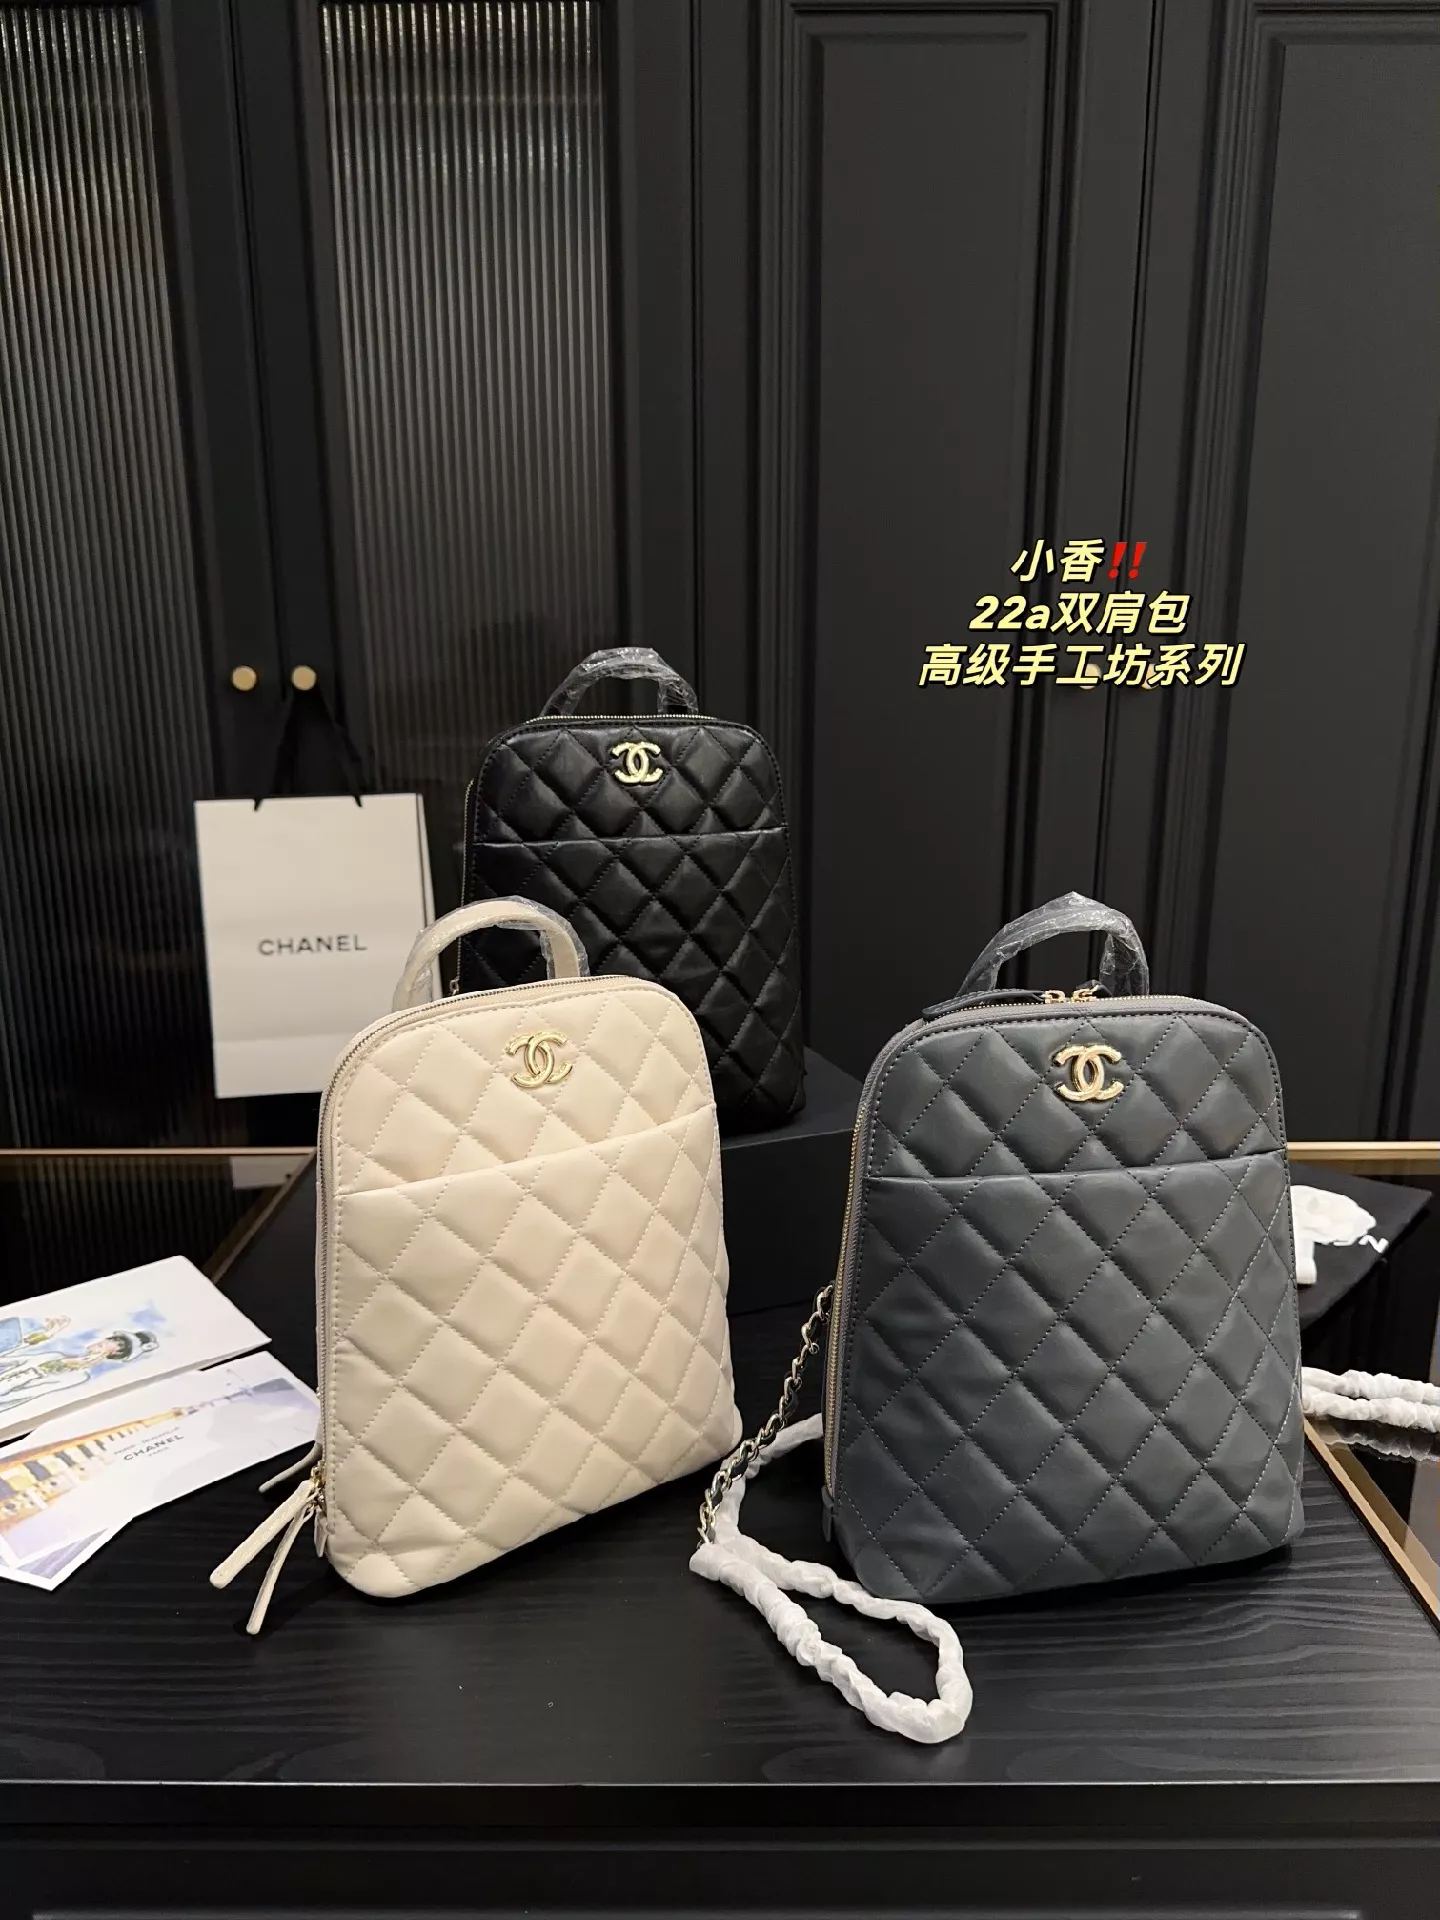 CHANEL bags Wholesale and retail, Gallery posted by Femaletrend